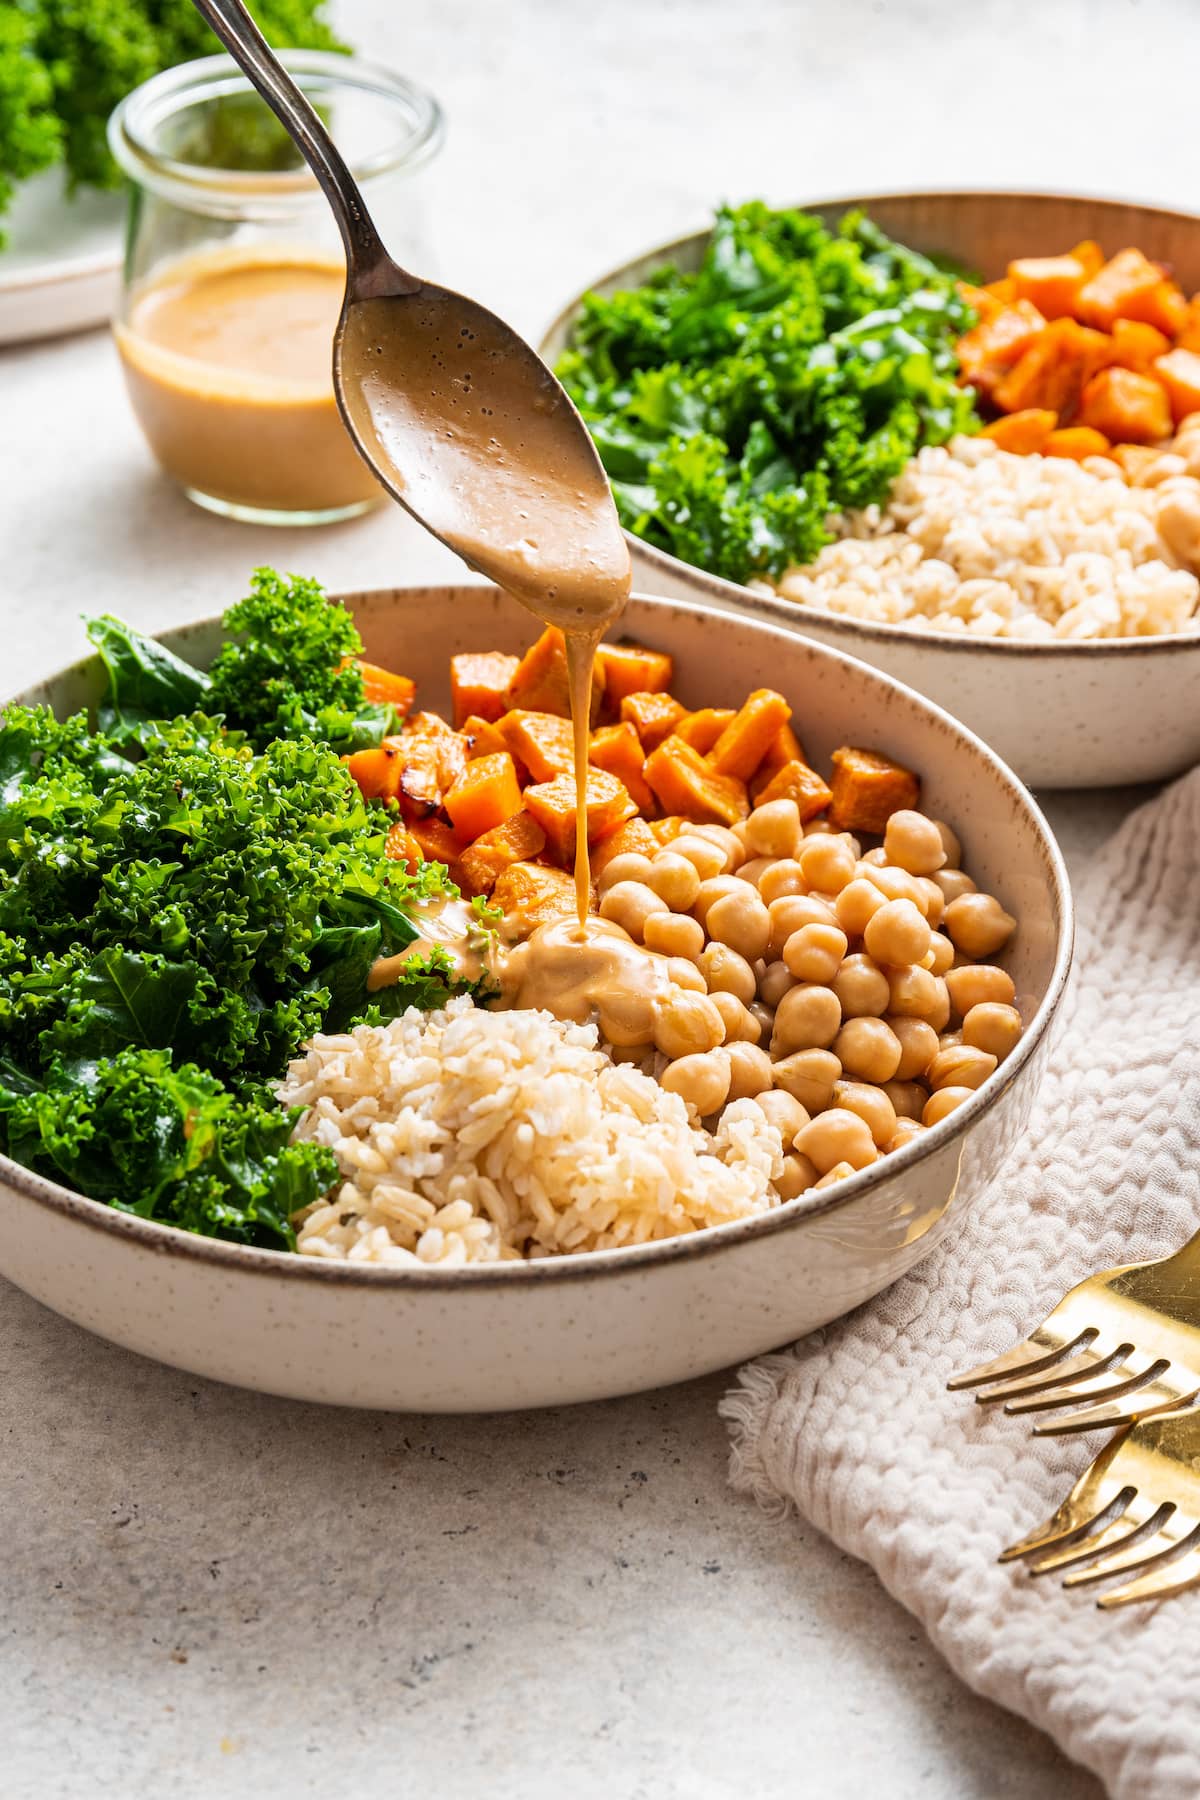 A spoon drizzles peanut sauce into a bowl of chickpeas, kale, brown rice, and sweet potato.